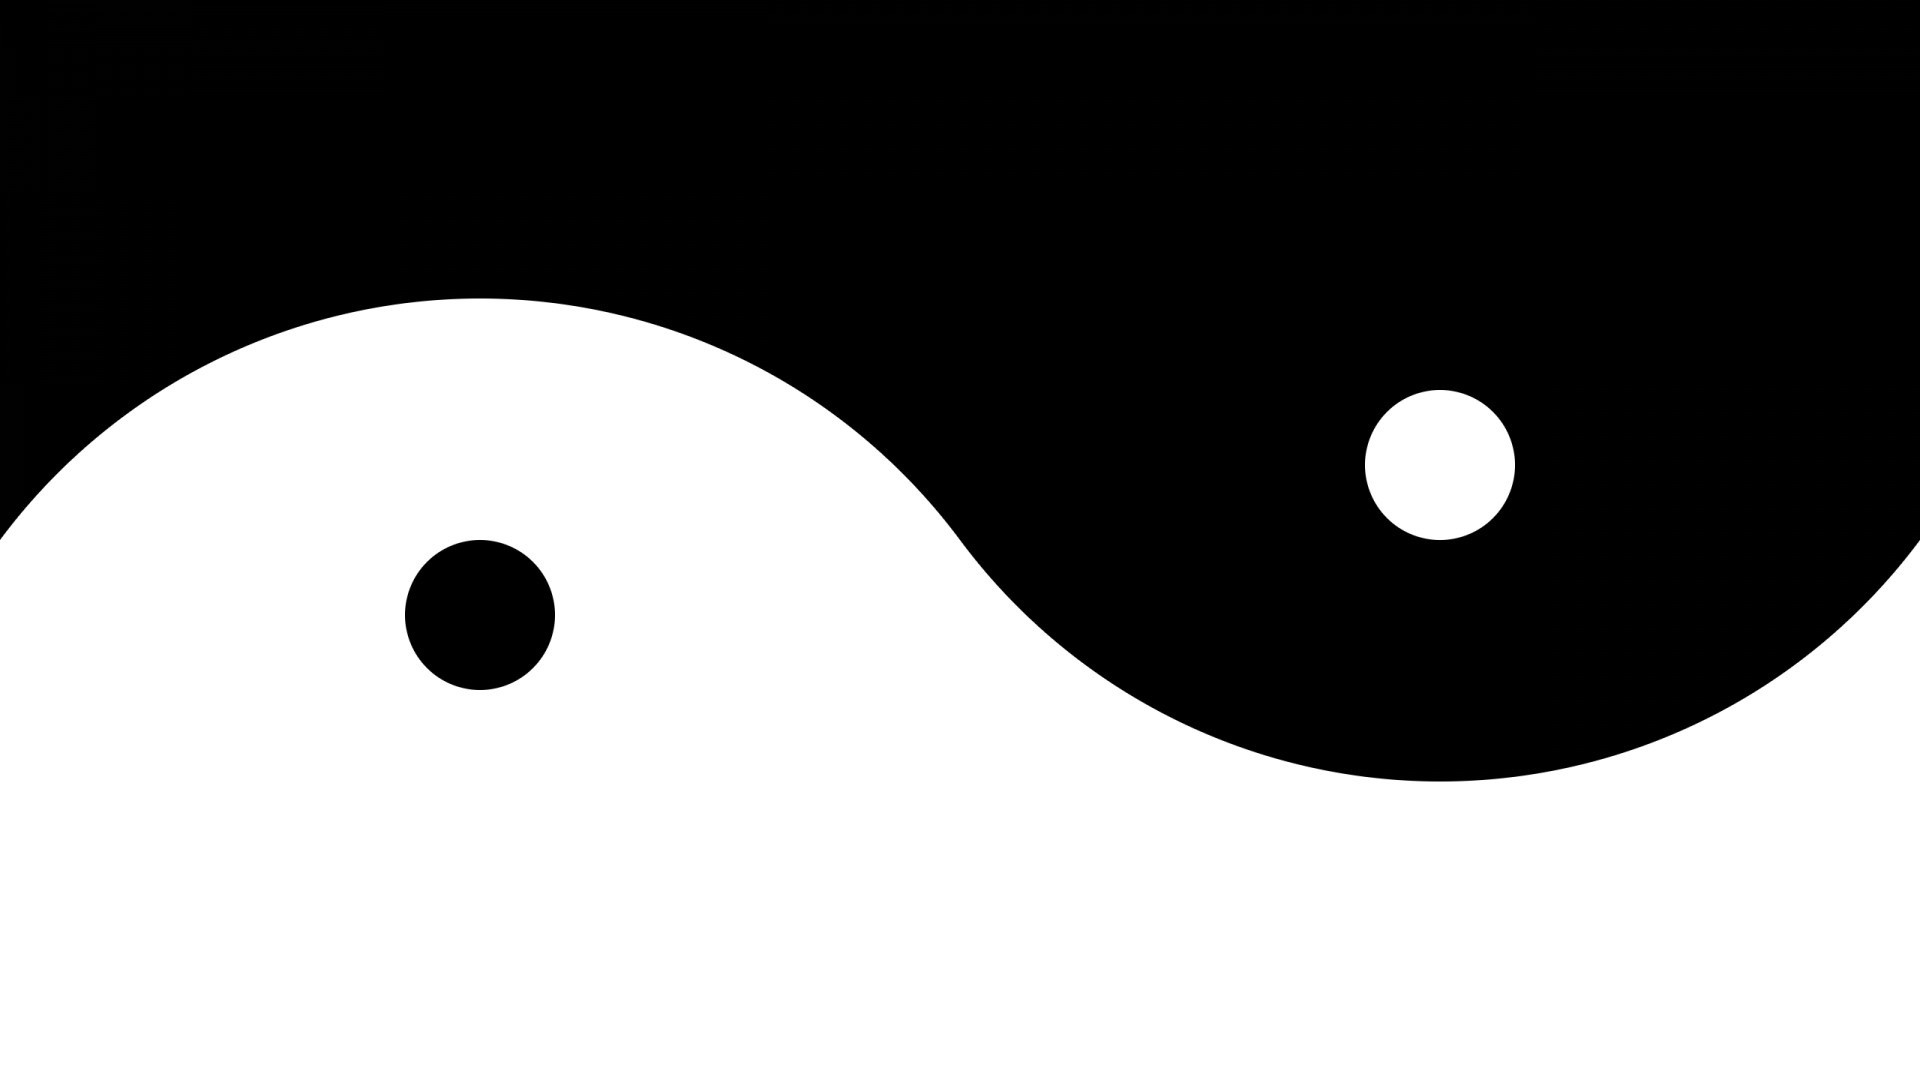 General 1920x1080 Yin and Yang black white digital art simple background